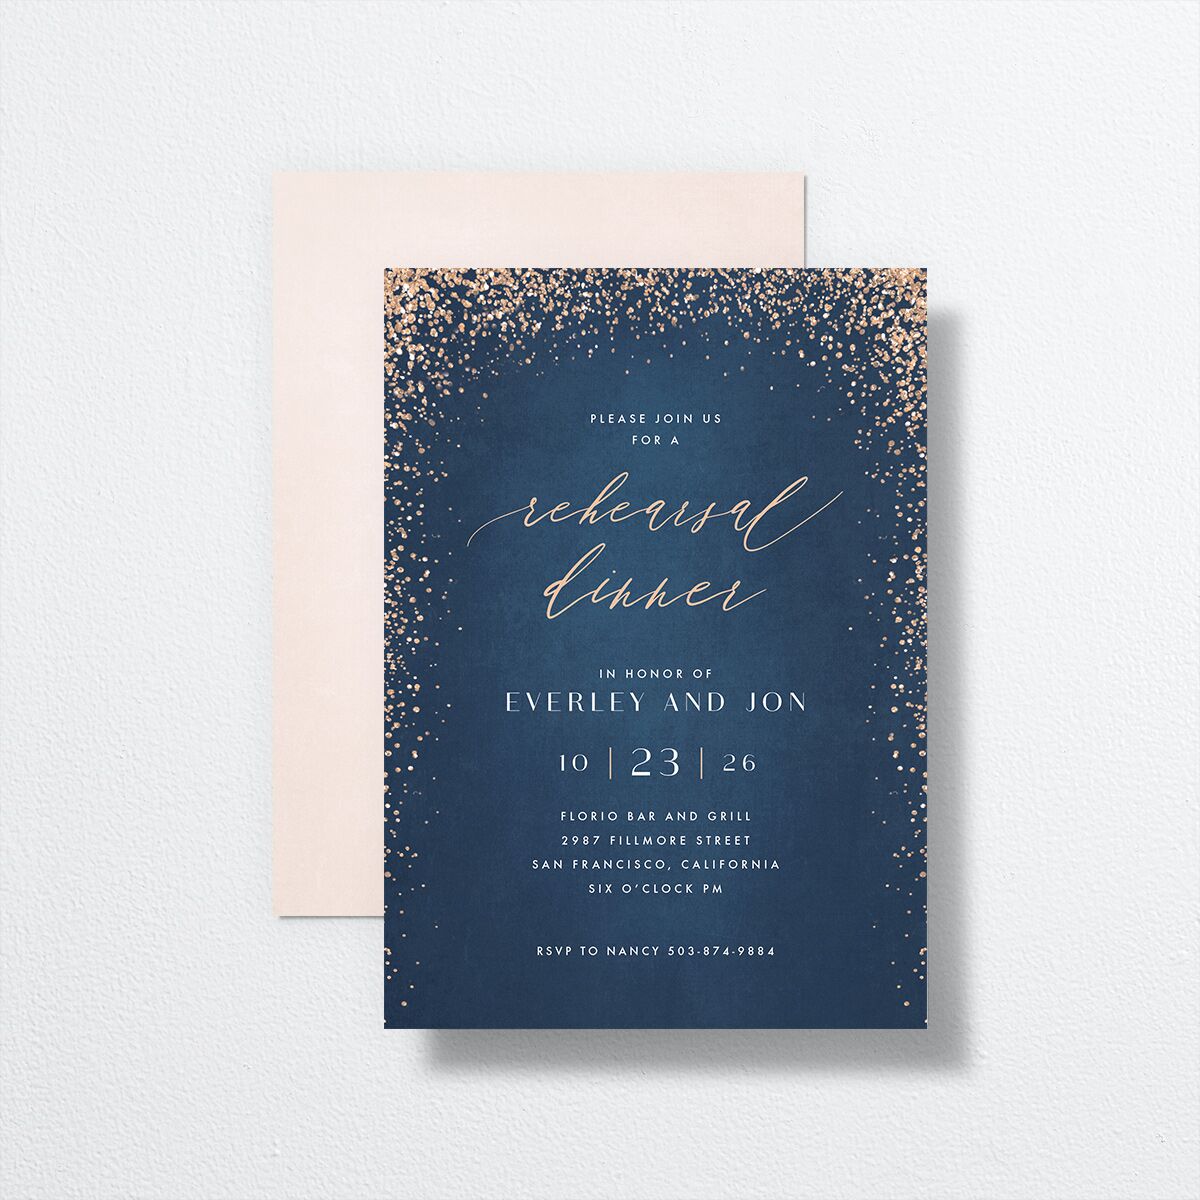 Sparkling Romance Rehearsal Dinner Invitations front-and-back